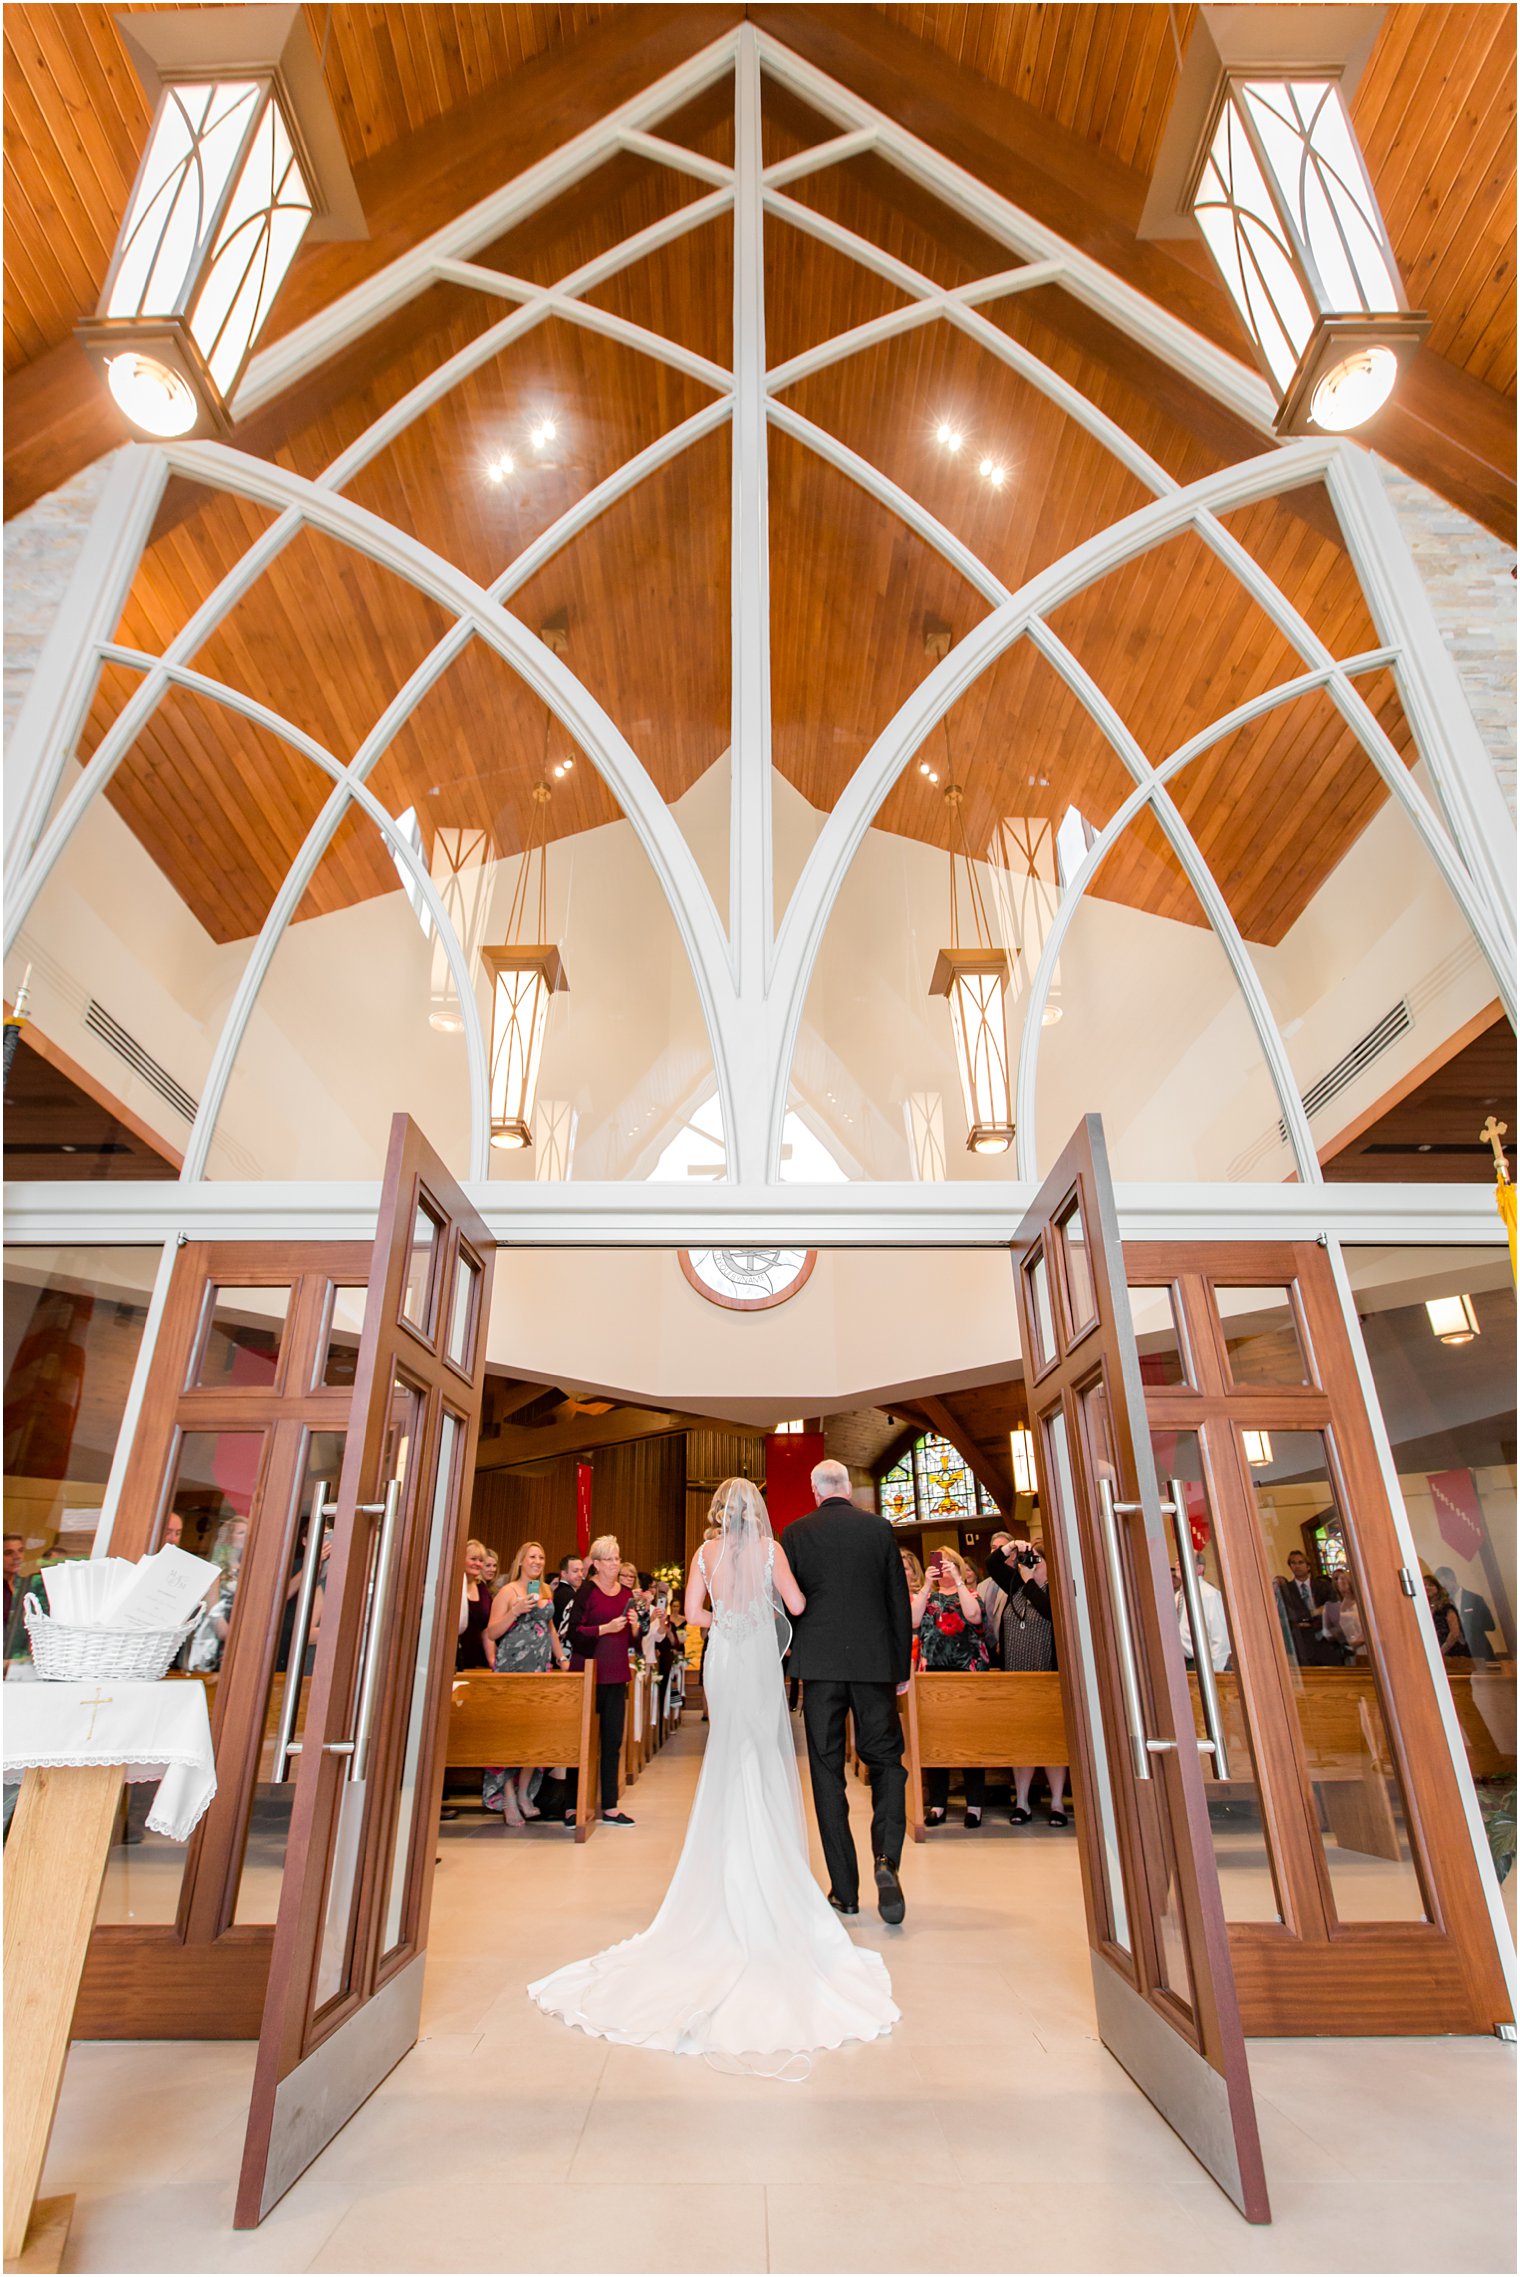 Wedding ceremony at Church of the Presentation in Upper Saddle River